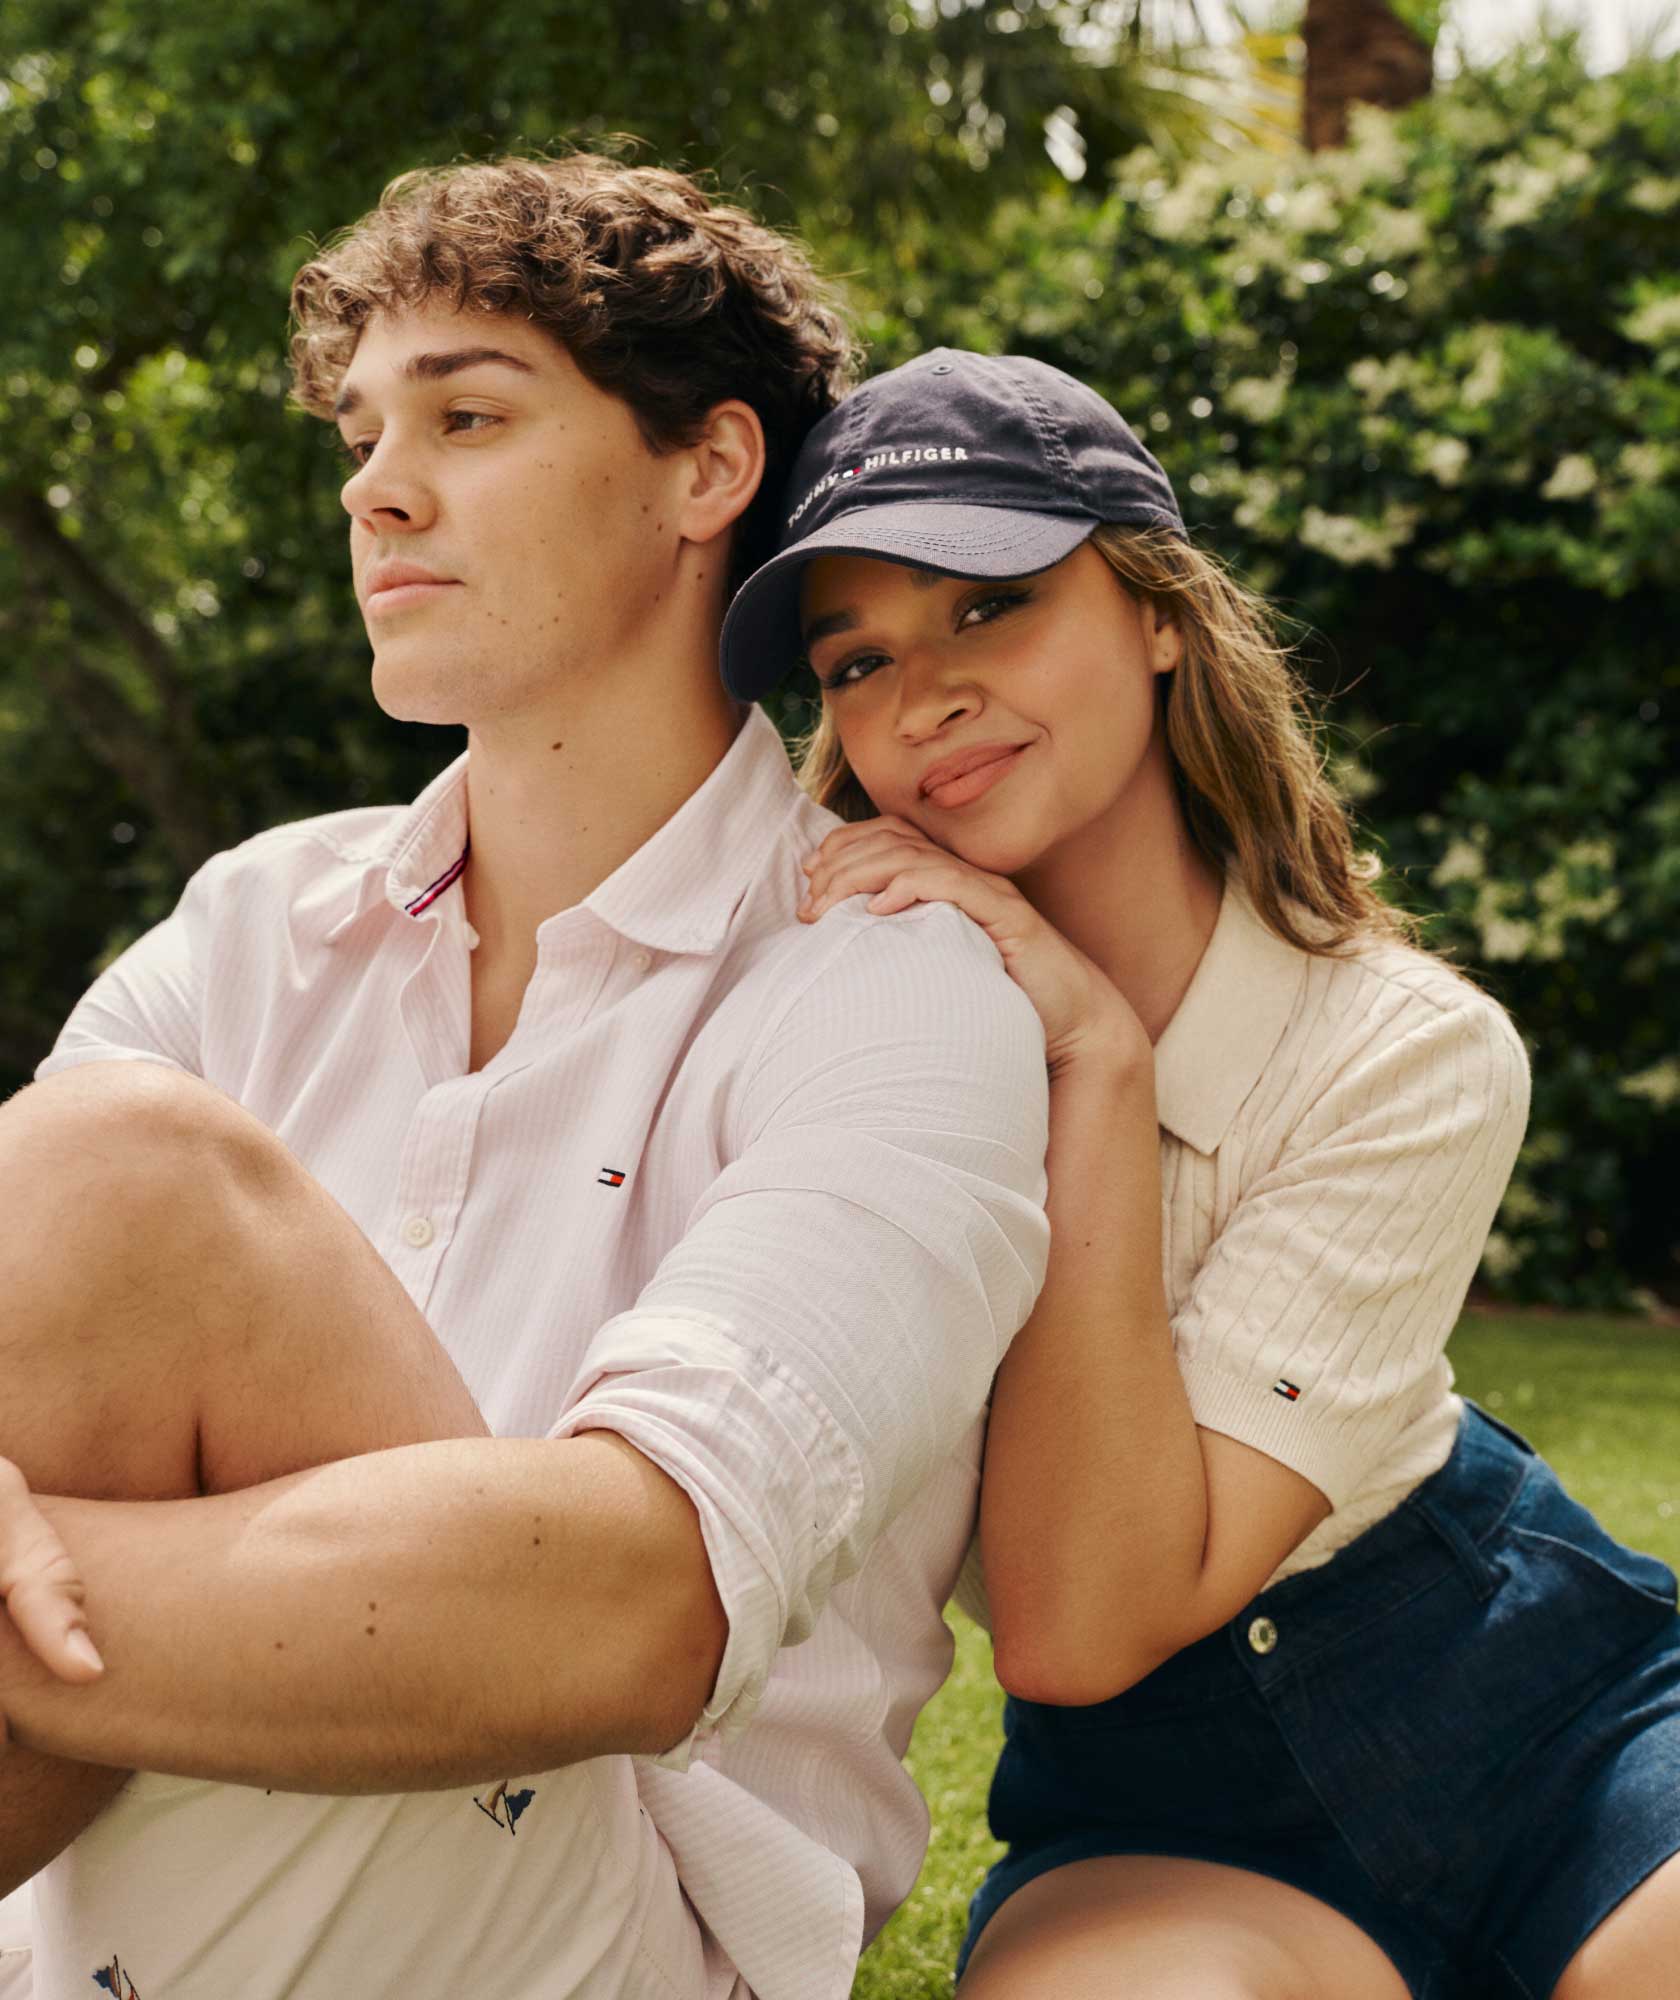 Tik Tok star Noah Beck and actress Madison Bailey wear new summer looks from Tommy Hilfiger.